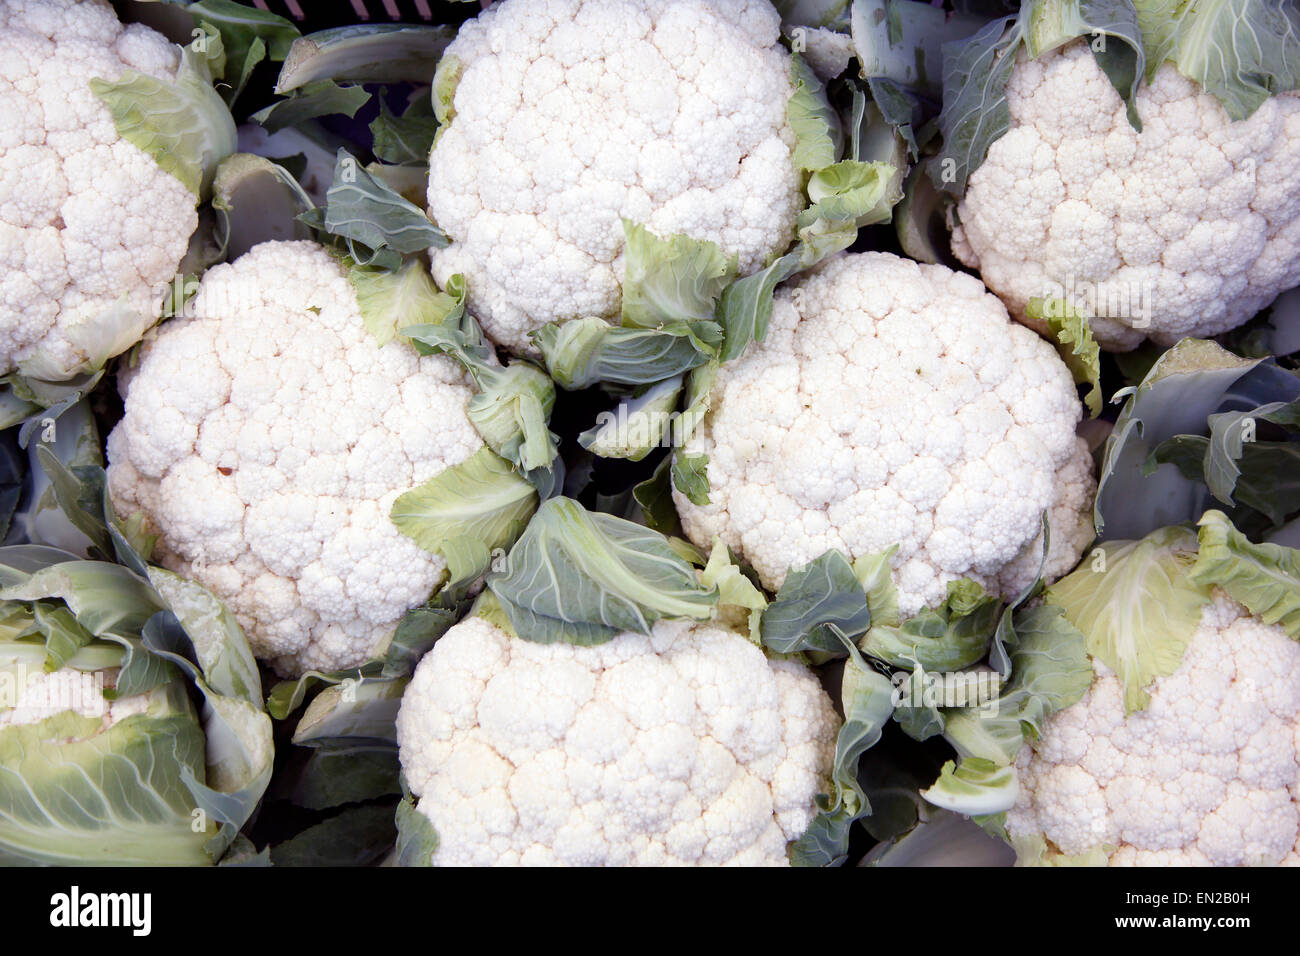 lot of cauliflowers packed together for sale Stock Photo